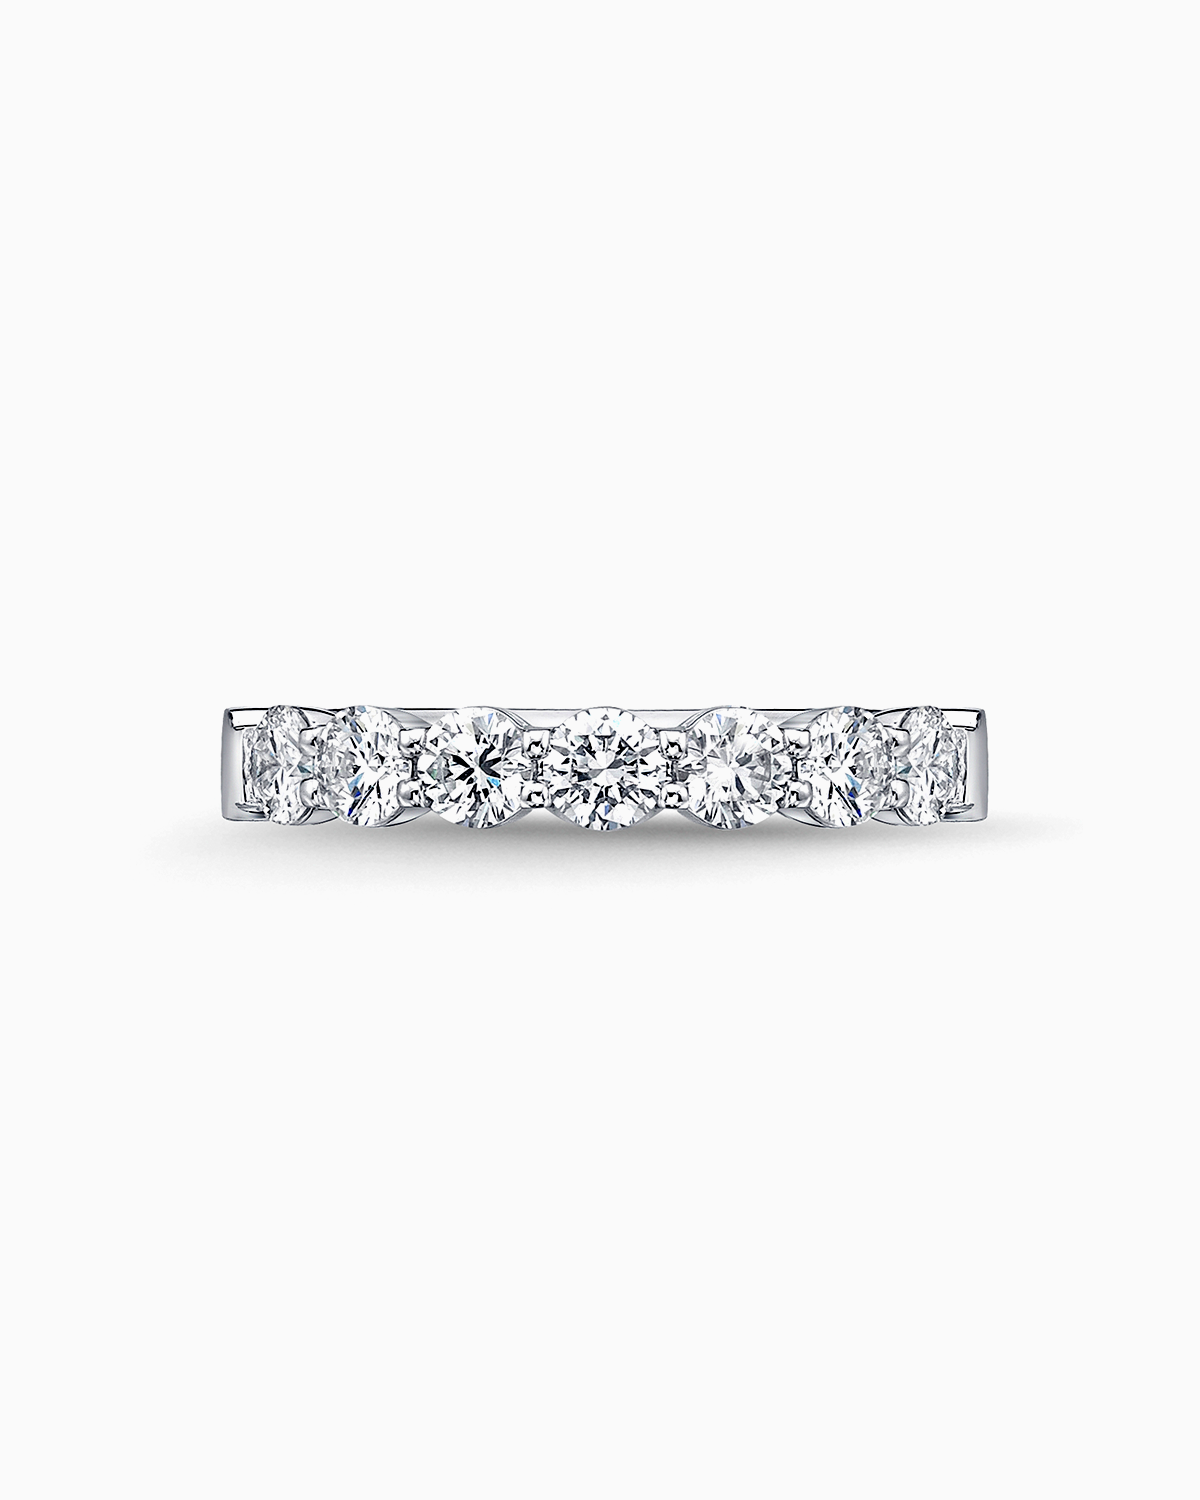 10 stone petit prong diamond ring in 18 karat white gold by claude and me jewellery